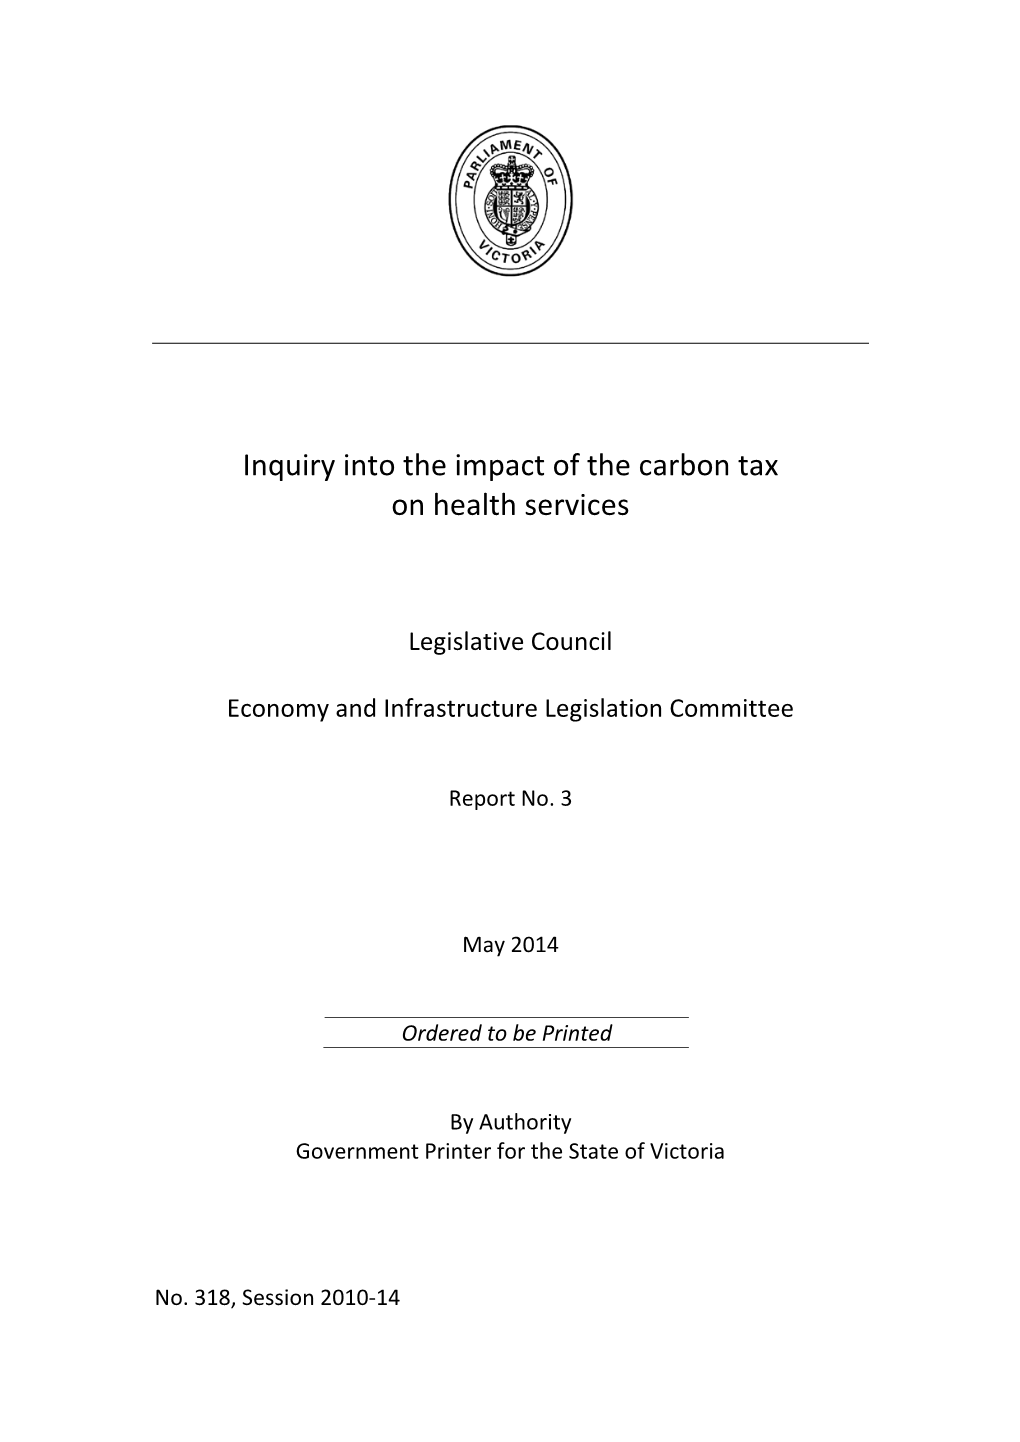 Inquiry Into the Impact of the Carbon Tax on Health Services